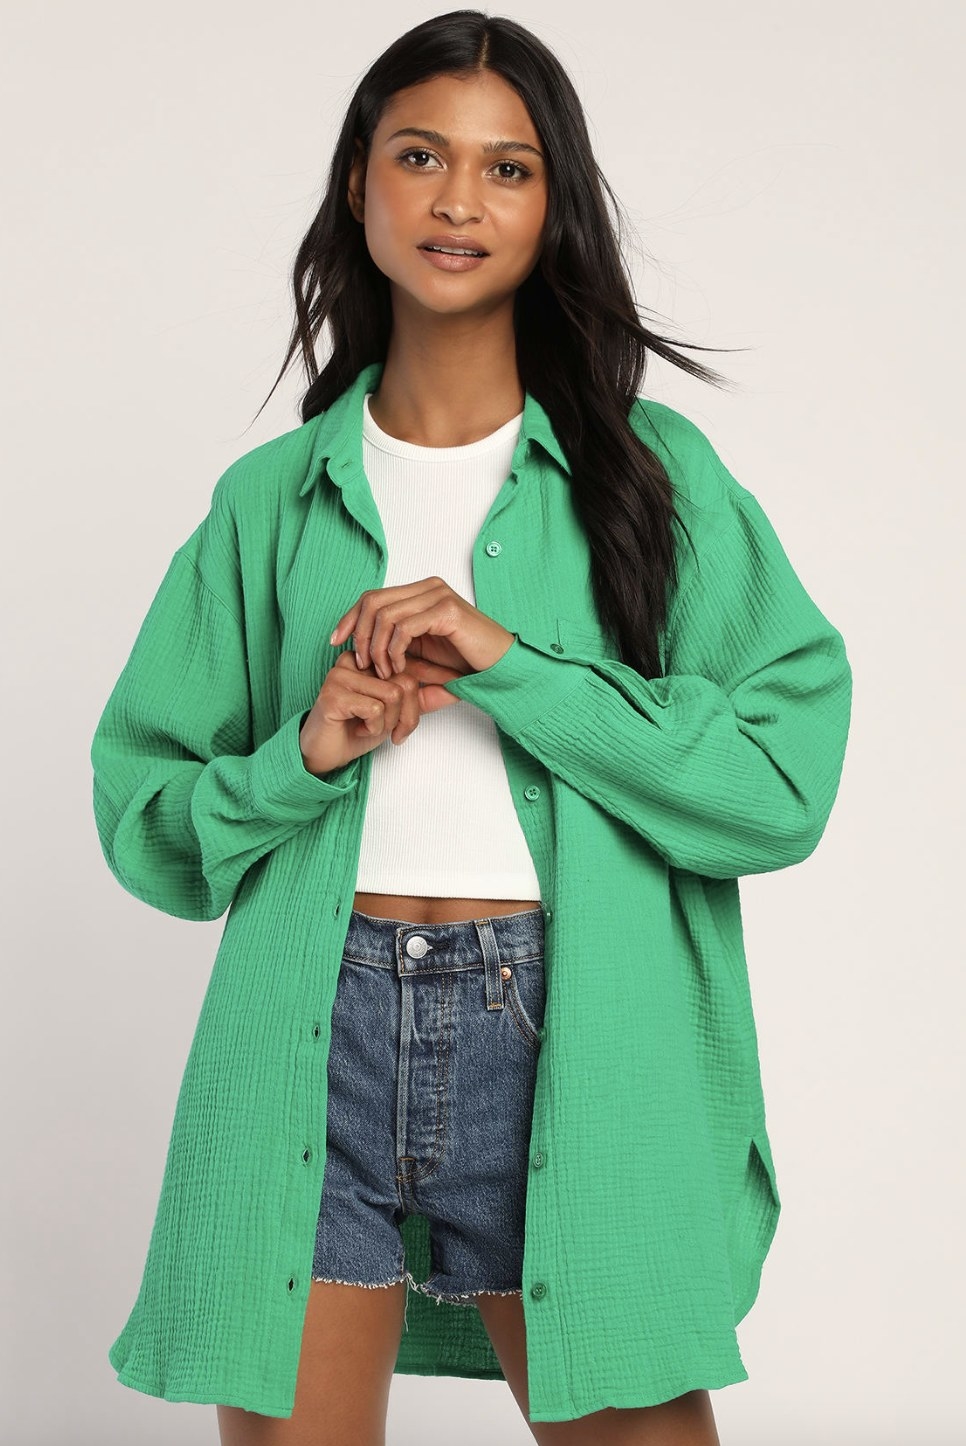 A model wearing the top in green